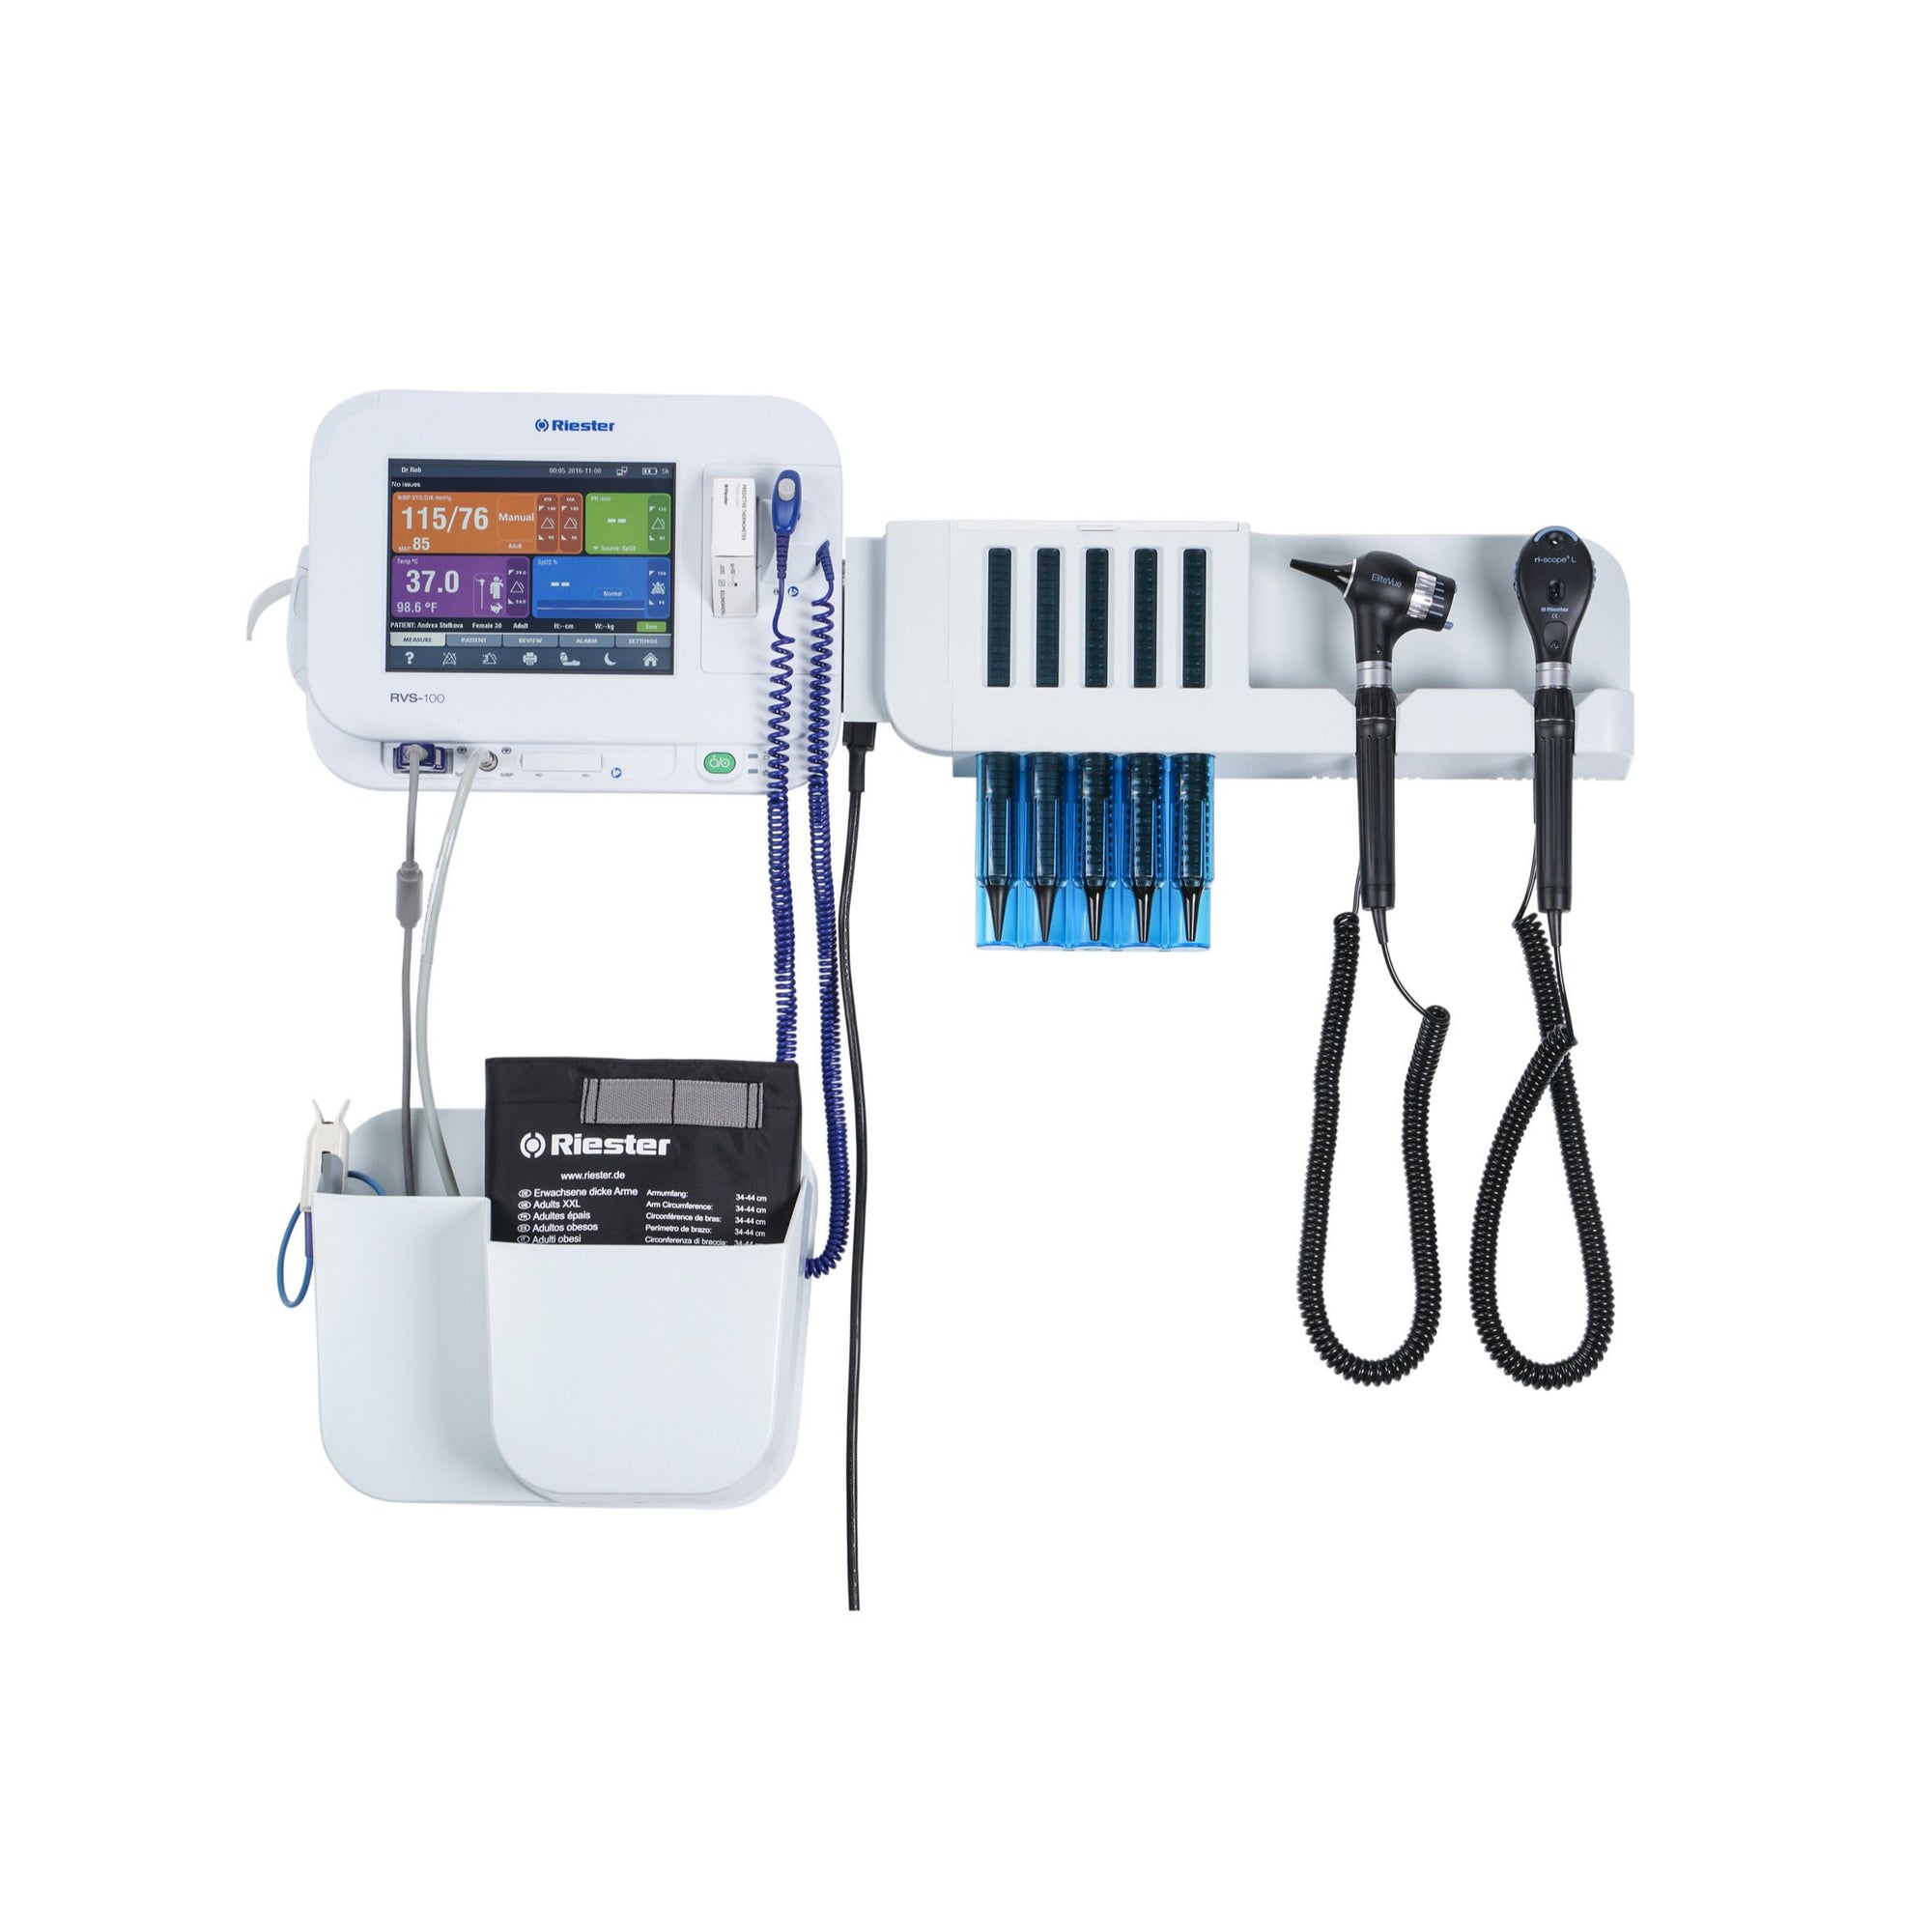 Riester RVS-200 Integrated Modular Wall Diagnostic Station with VSM, with Diagnostic Heads